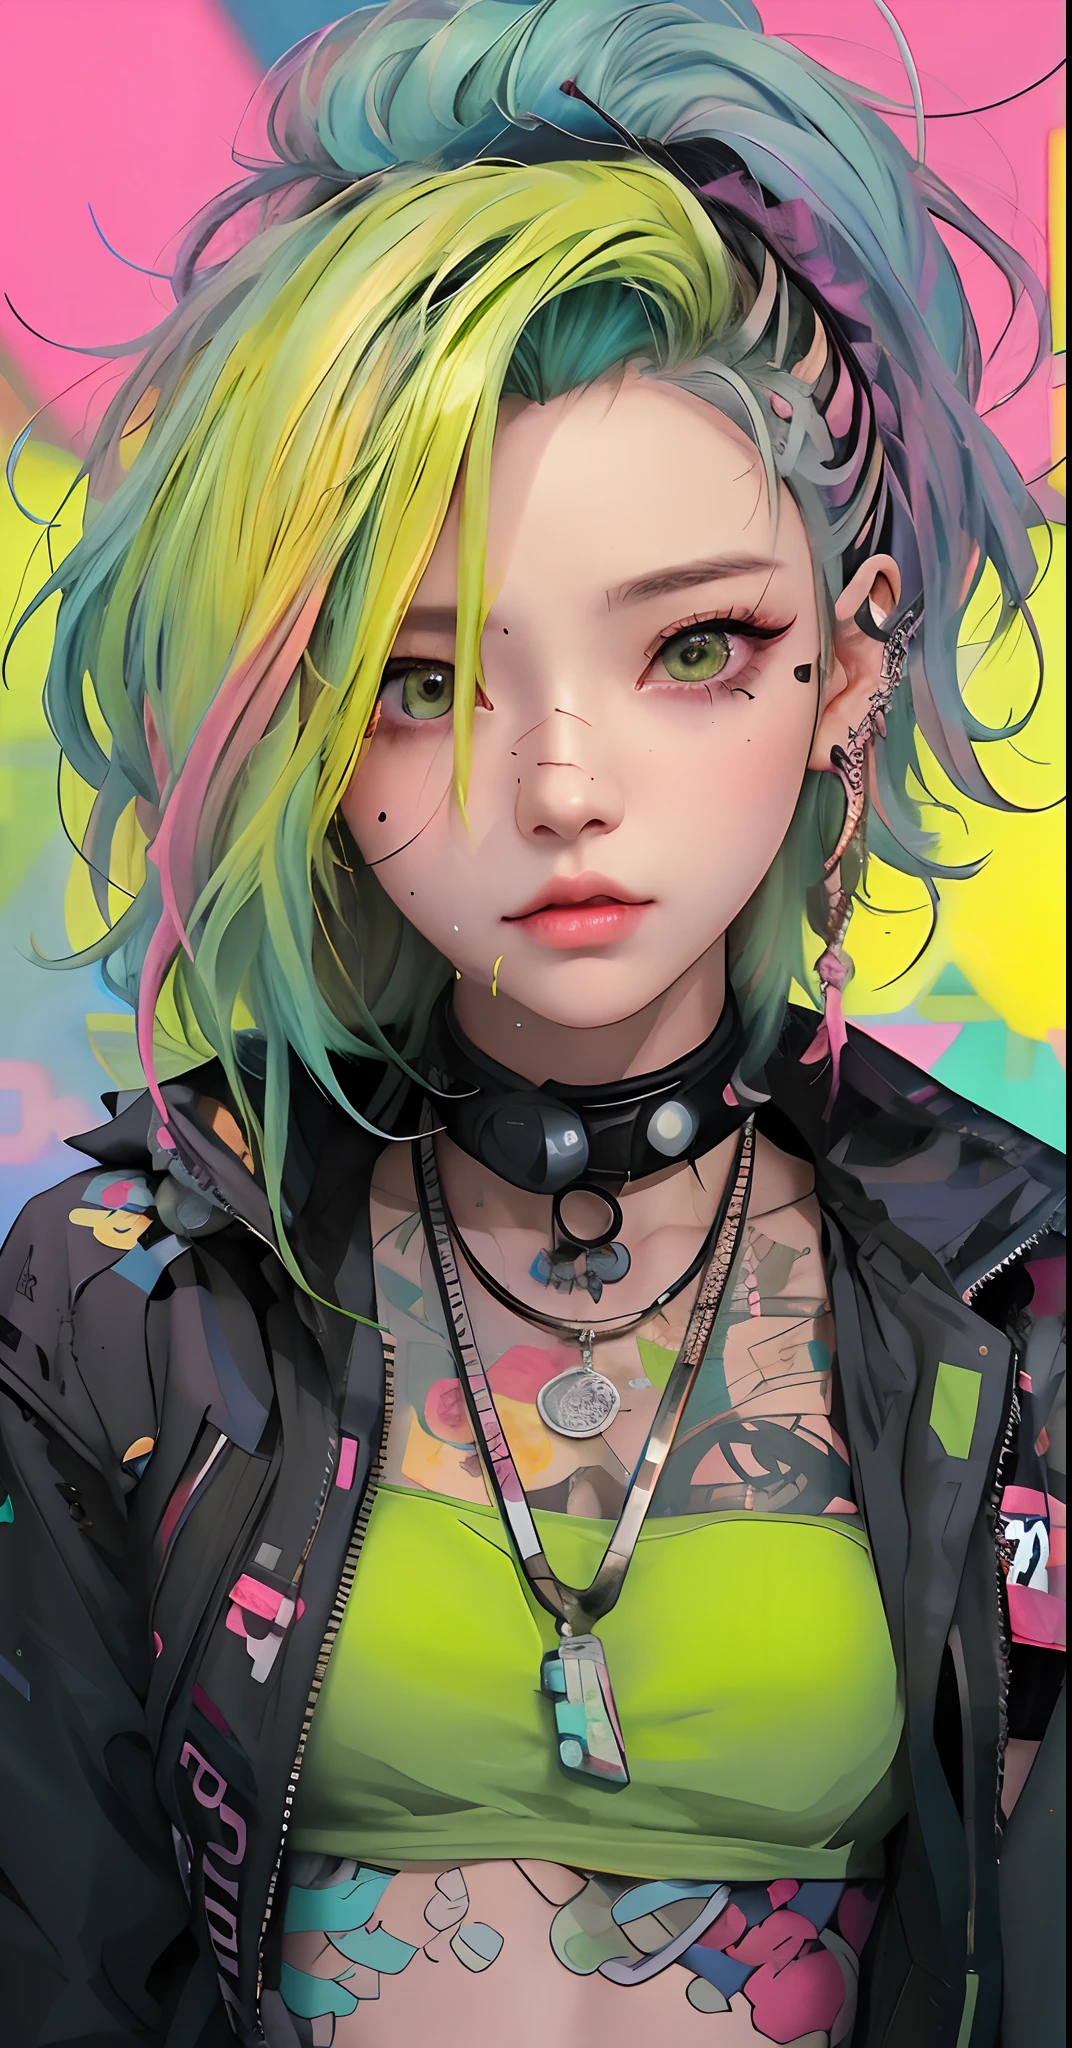 a woman with colored hair and piercings wearing a green top, rossdraws cartoon vibrant, rossdraws pastel vibrant, cyberpunk anime art, cyberpunk artstyle, cyberpunk anime art, anime vibes, cyberpunk style color, decora inspired illustrations, Digital Cyberpunk - Anime Art, 8 0 s anime vibe, cyberpunk anime girl, digital cyberpunk anime art, Arte estilo de anime